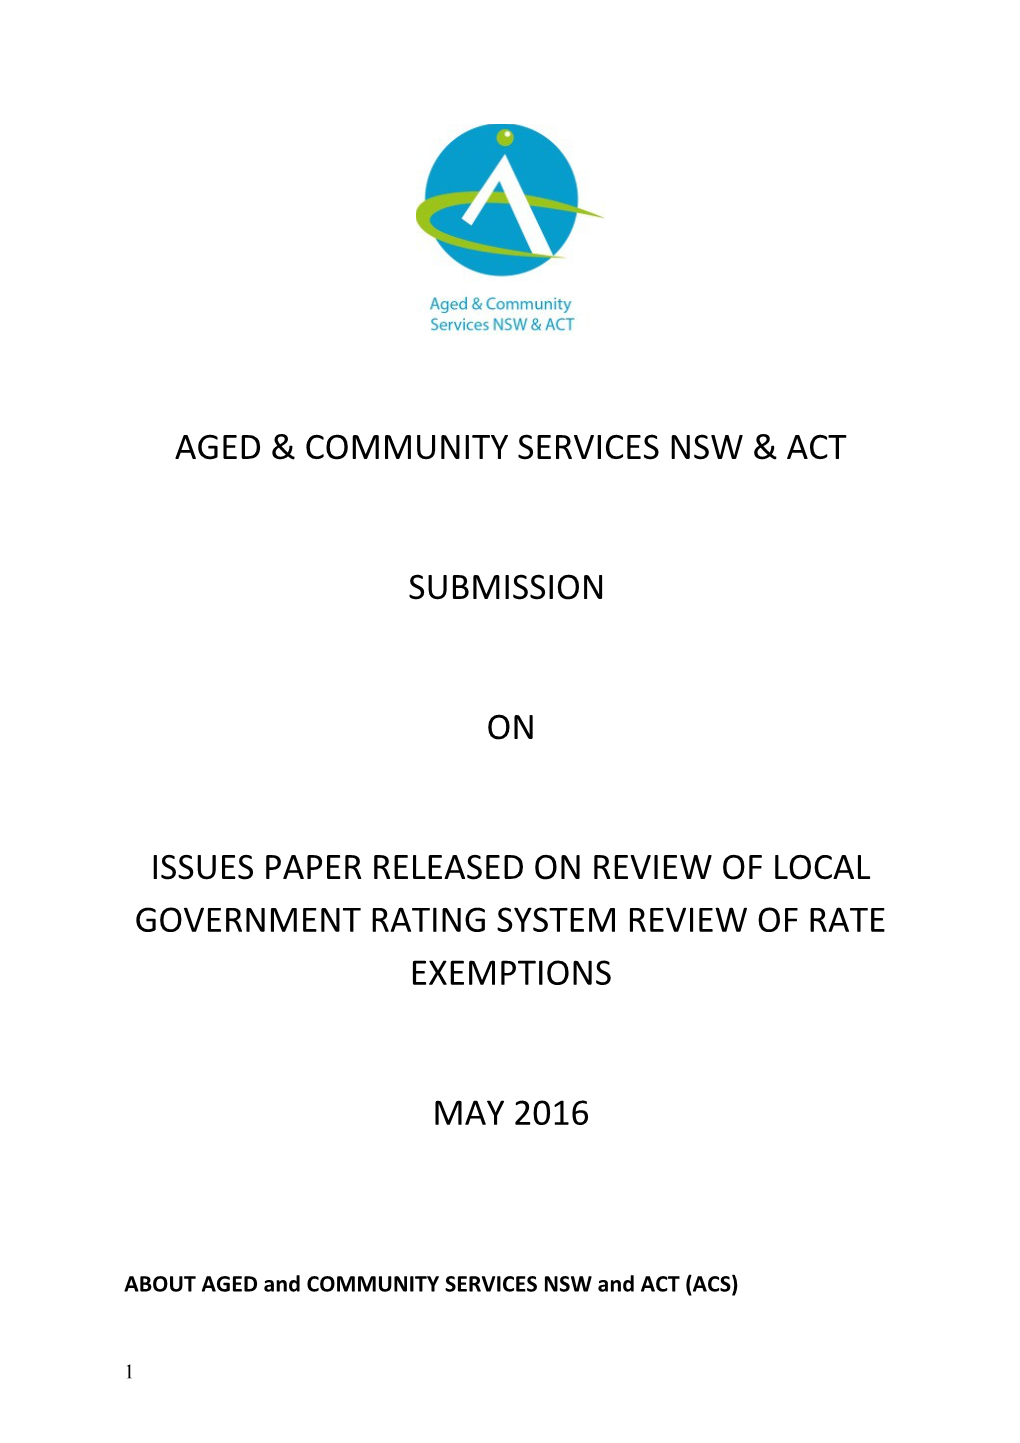 ABOUT AGED and COMMUNITY SERVICES NSW and ACT (ACS)